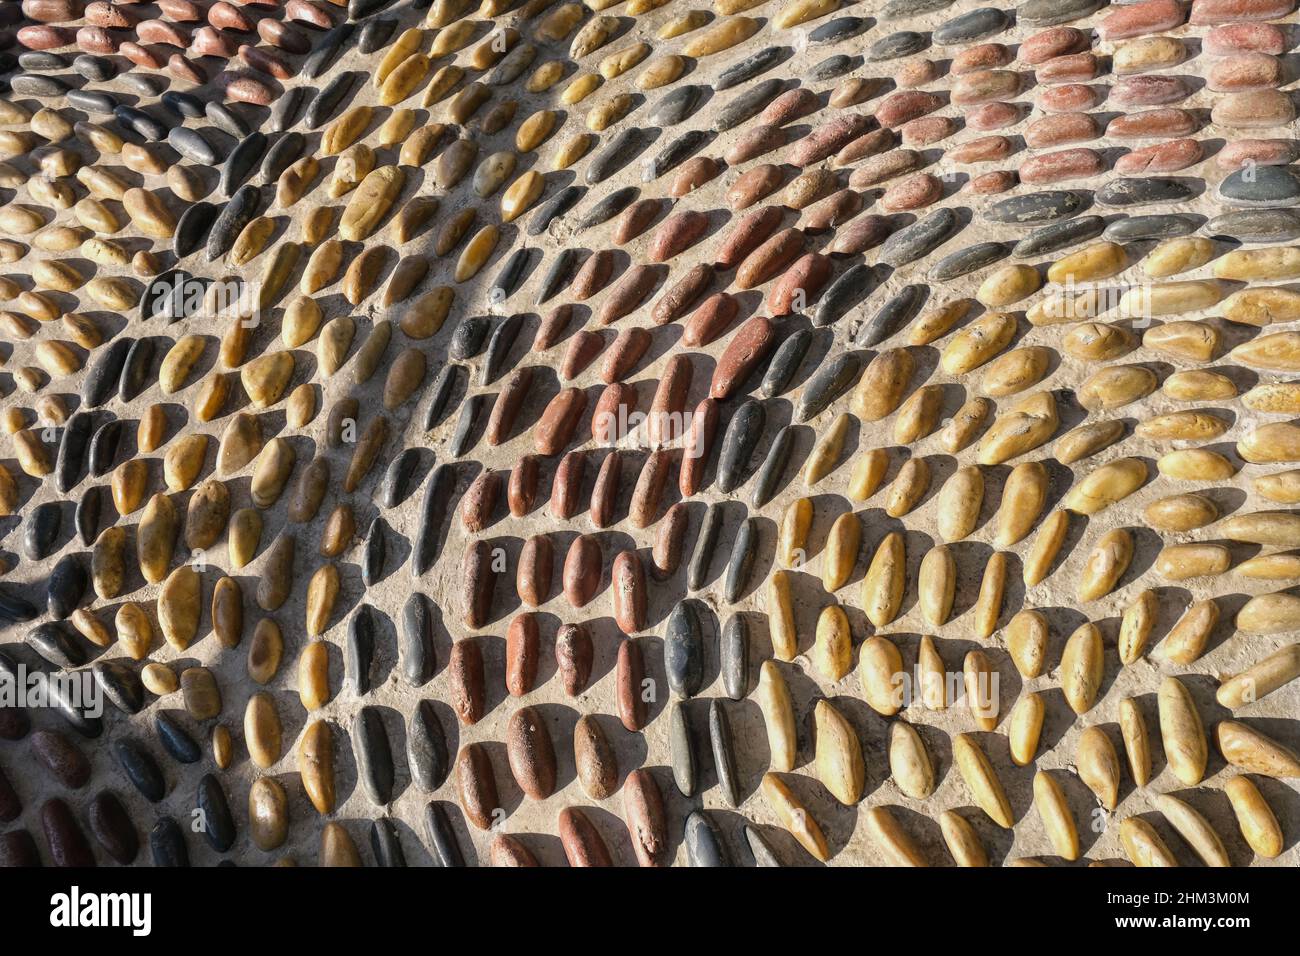 Fragment of reflexology cobblestones pathway for foot massage . Mosaic circle pattern from convex rounded pebble stones  Stock Photo